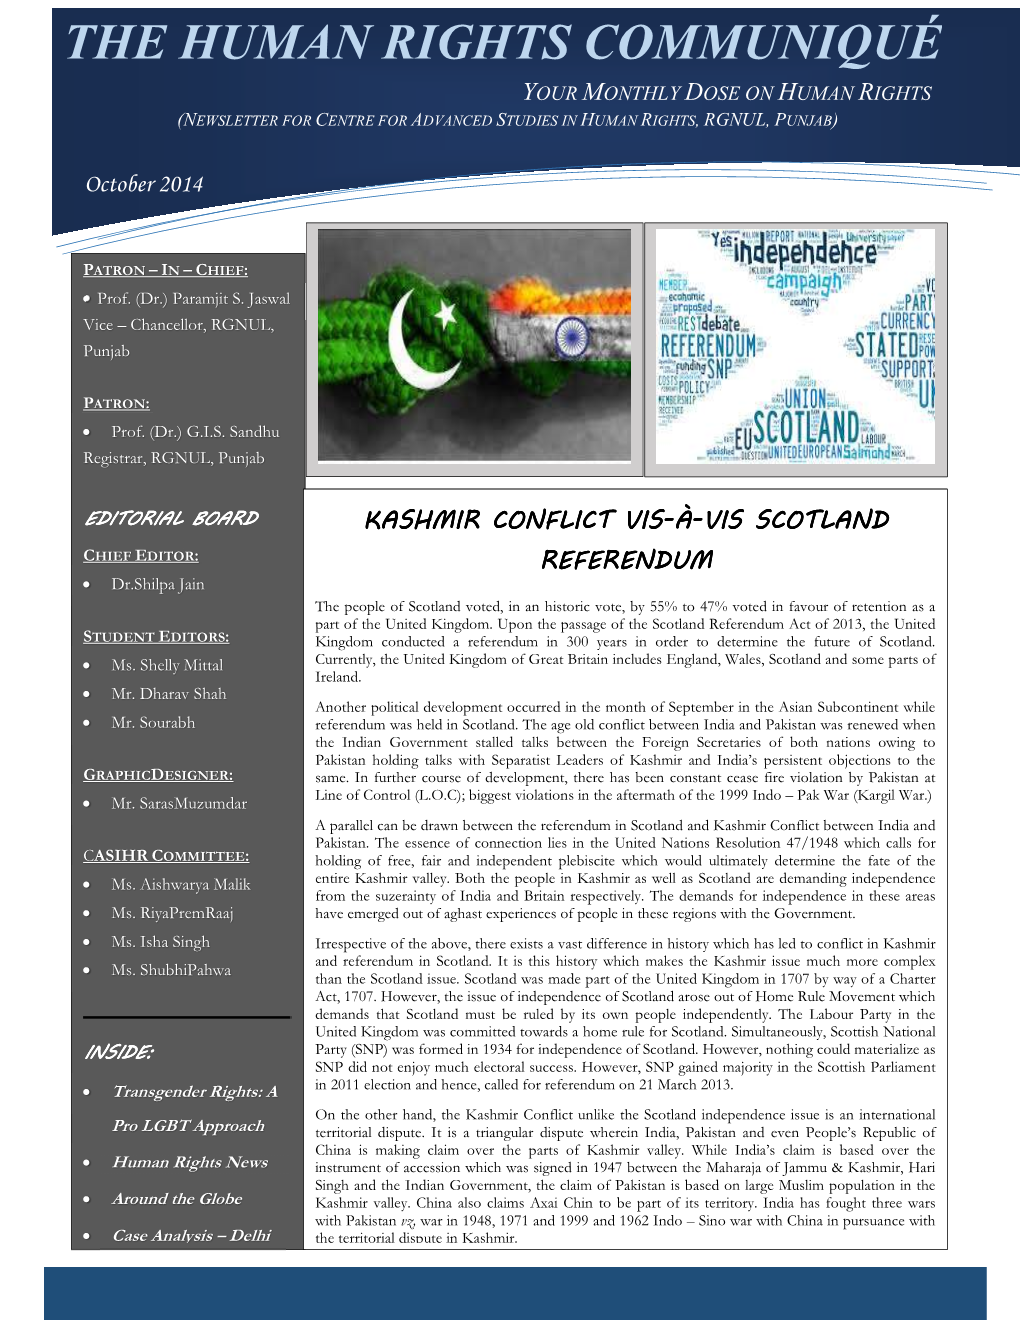 The Human Rights Communiqué Your Monthly Dose on Human Rights 2222(N Ewsletter for Centre for Advanced Studies in Human Rights, Rgnul, Punjab)